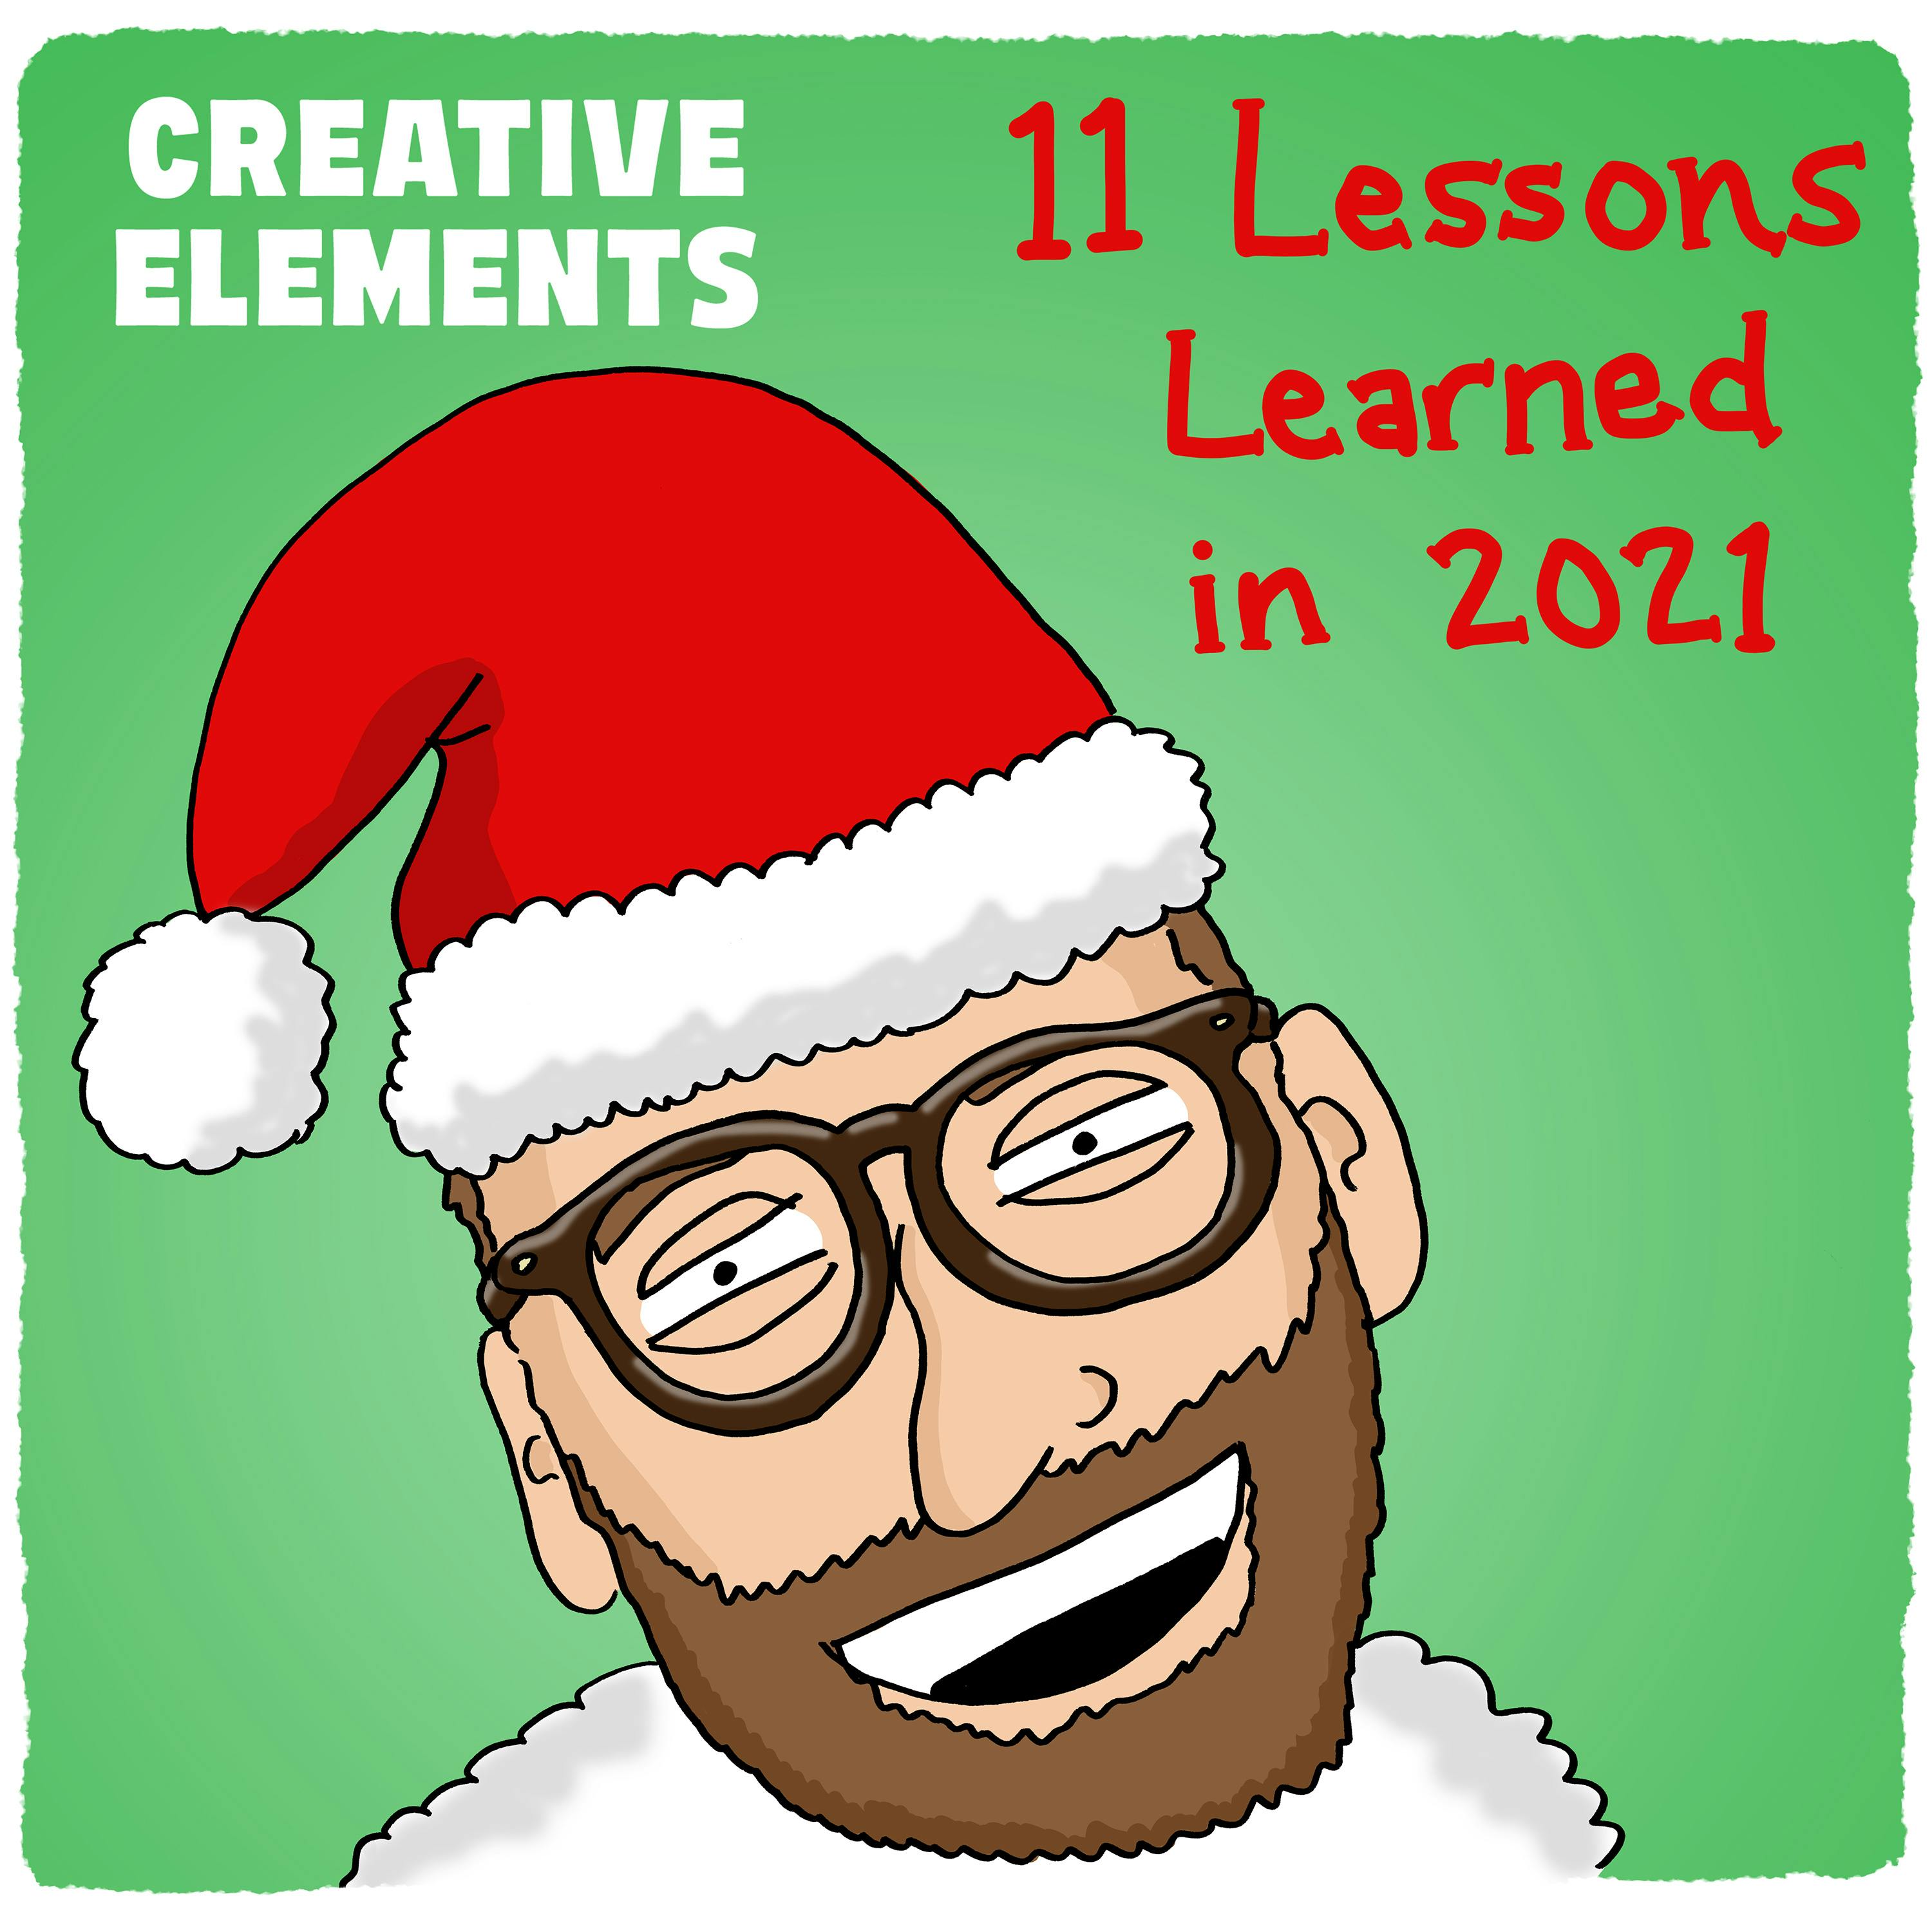 #84: 11 Lessons Learned in 2021